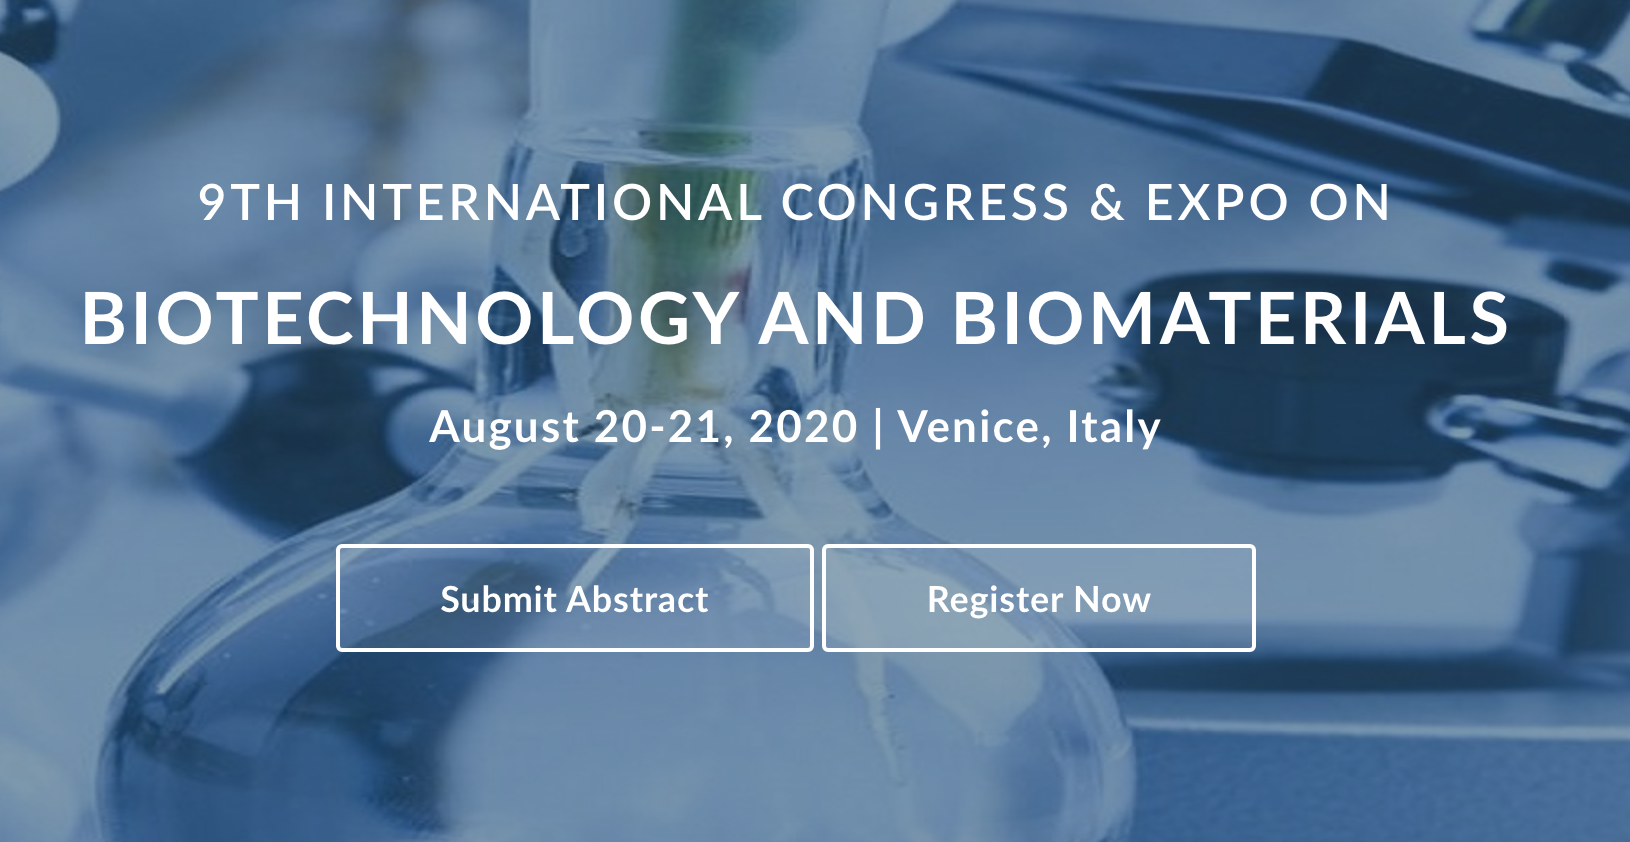 Scientific Federation 9th International Conference on Biotechnology